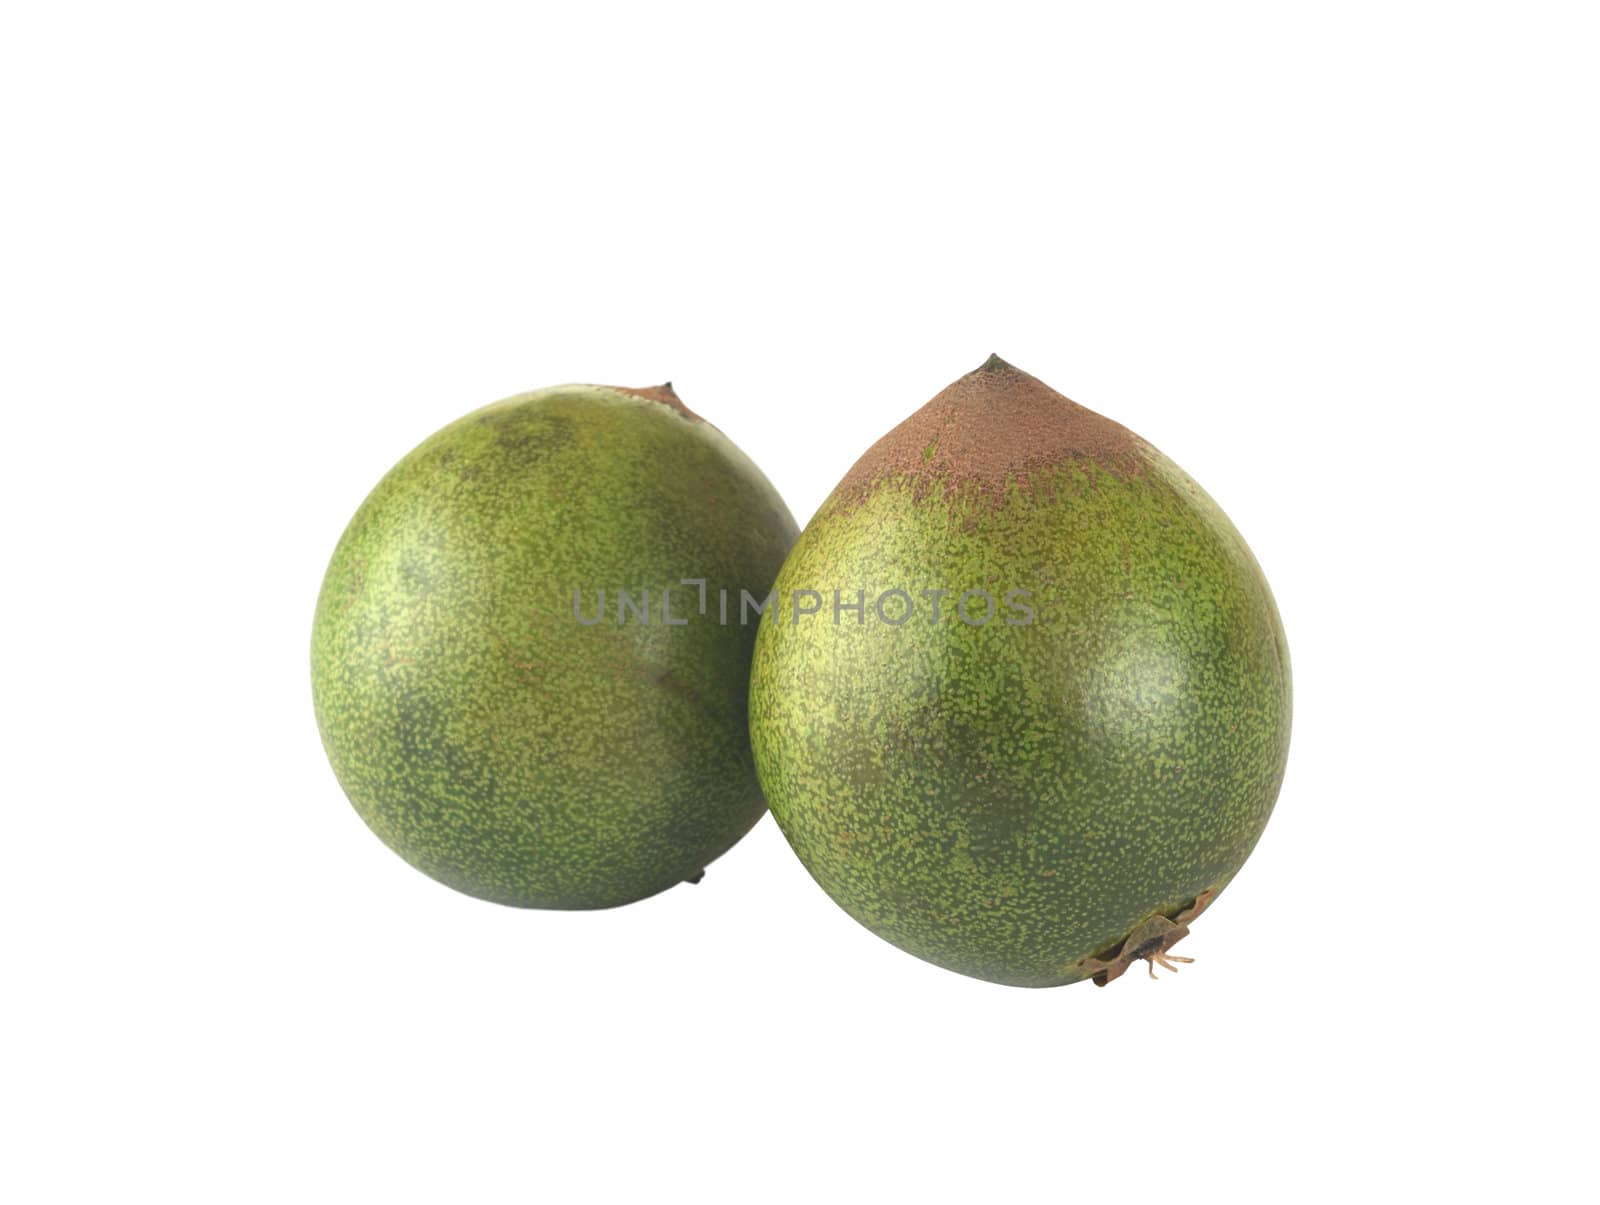 Fruit called Lucuma (lat. Pouteria lucuma) grown in the Andean region of Peru, which is very popular in Peru (Isolated on White)